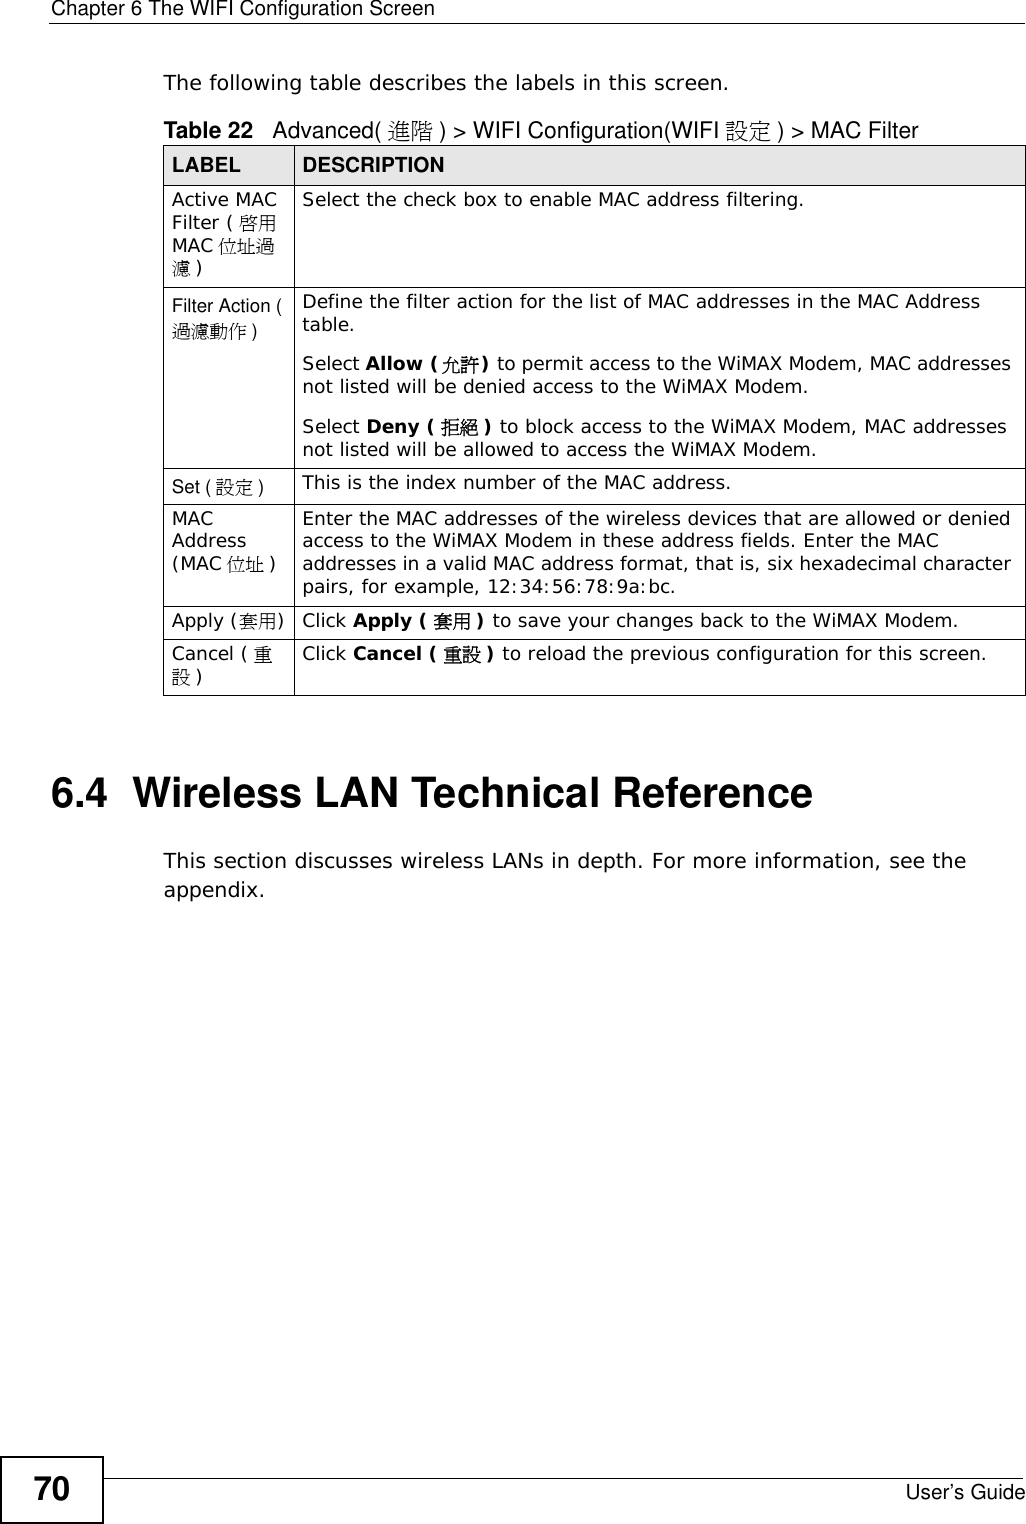 Chapter 6 The WIFI Configuration ScreenUser’s Guide70The following table describes the labels in this screen.6.4  Wireless LAN Technical ReferenceThis section discusses wireless LANs in depth. For more information, see the appendix.Table 22   Advanced( 進階 ) &gt; WIFI Configuration(WIFI 設定 ) &gt; MAC FilterLABEL DESCRIPTIONActive MAC Filter ( 啟用MAC 位址過濾)Select the check box to enable MAC address filtering.Filter Action (過濾動作 )Define the filter action for the list of MAC addresses in the MAC Address table. Select Allow (允許) to permit access to the WiMAX Modem, MAC addresses not listed will be denied access to the WiMAX Modem. Select Deny ( 拒絕 ) to block access to the WiMAX Modem, MAC addresses not listed will be allowed to access the WiMAX Modem.Set ( 設定 )This is the index number of the MAC address.MAC Address (MAC 位址 )Enter the MAC addresses of the wireless devices that are allowed or denied access to the WiMAX Modem in these address fields. Enter the MAC addresses in a valid MAC address format, that is, six hexadecimal character pairs, for example, 12:34:56:78:9a:bc.Apply (套用)Click Apply ( 套用 ) to save your changes back to the WiMAX Modem.Cancel ( 重設)Click Cancel ( 重設 ) to reload the previous configuration for this screen.